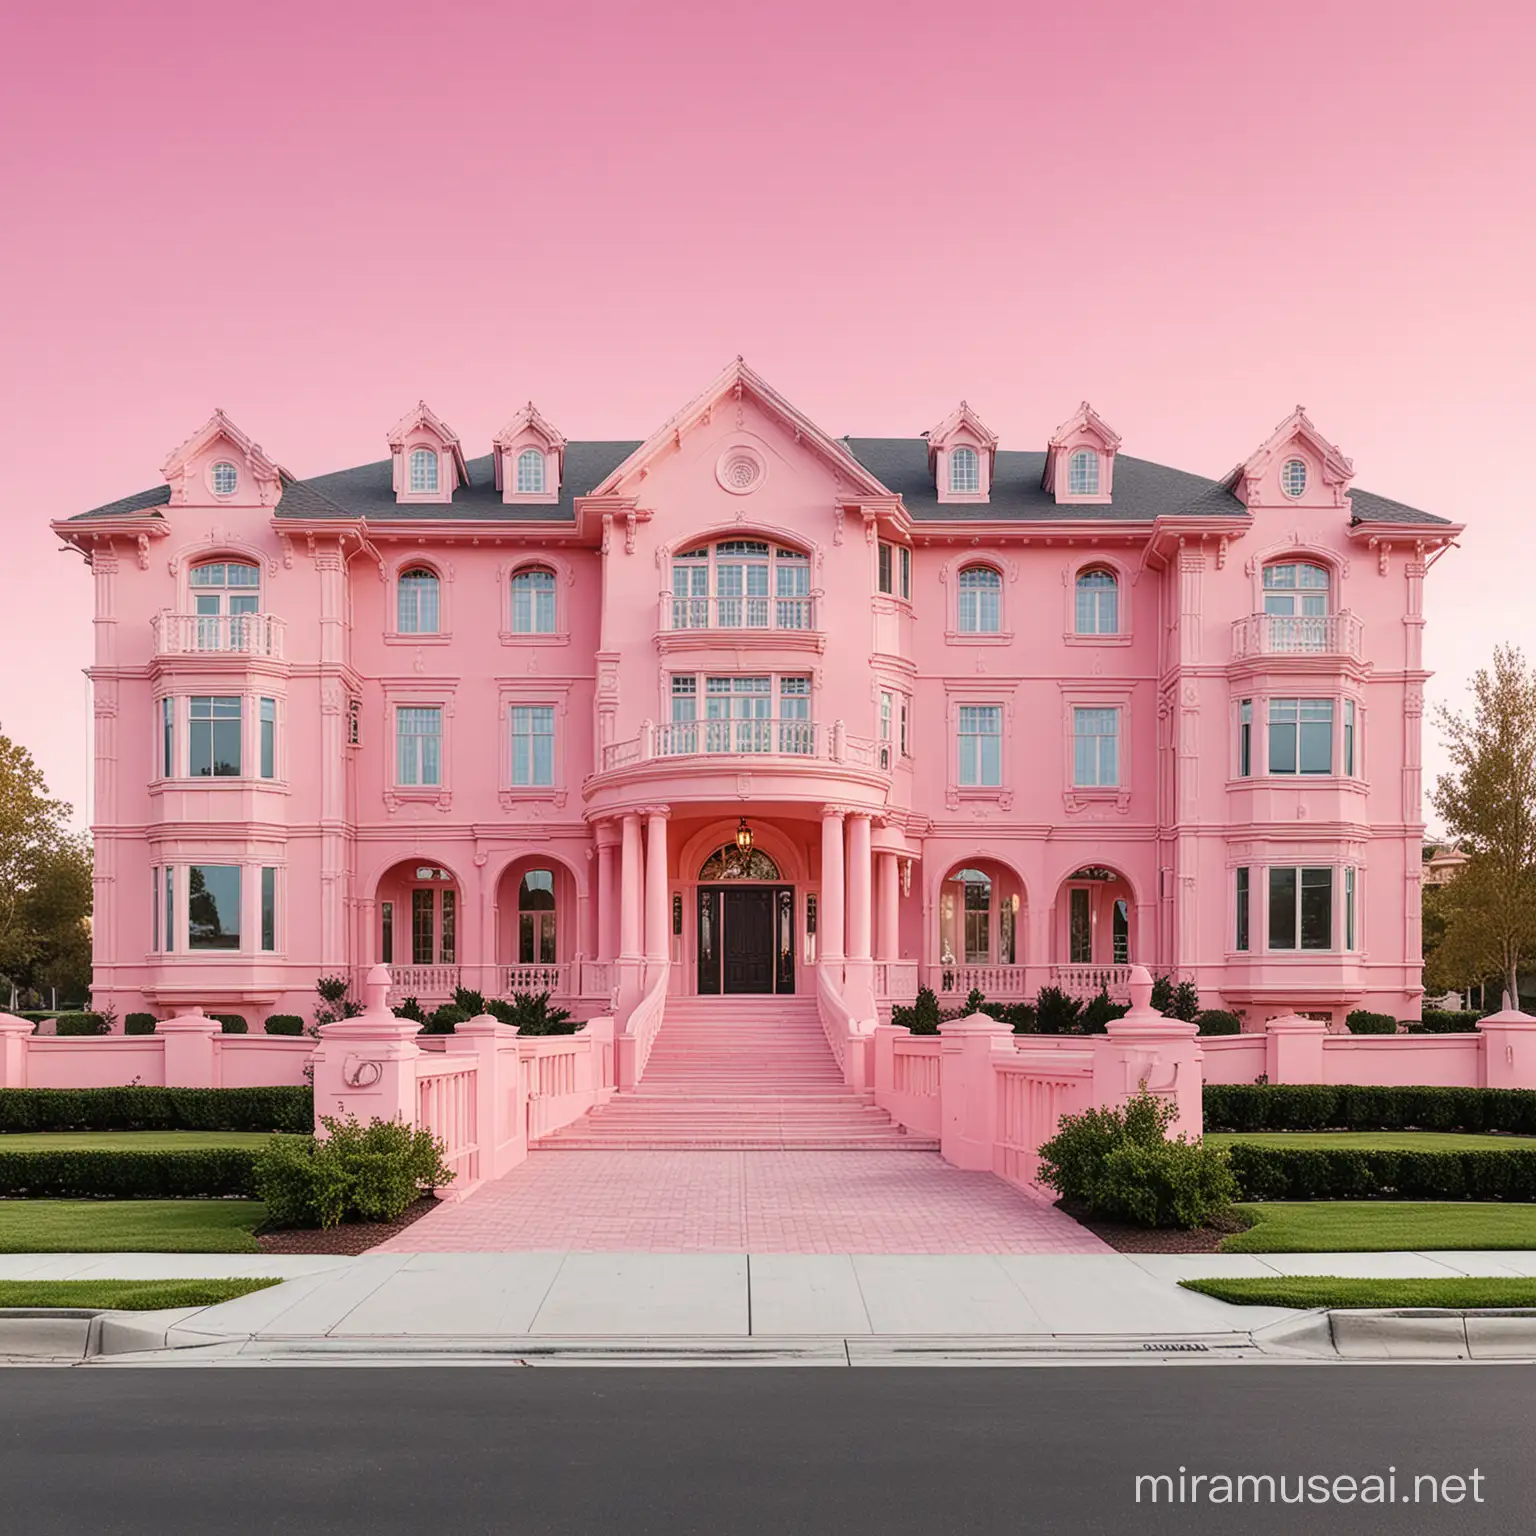 huge pink multi-story dream house mansion, from front view with drive way, no background 